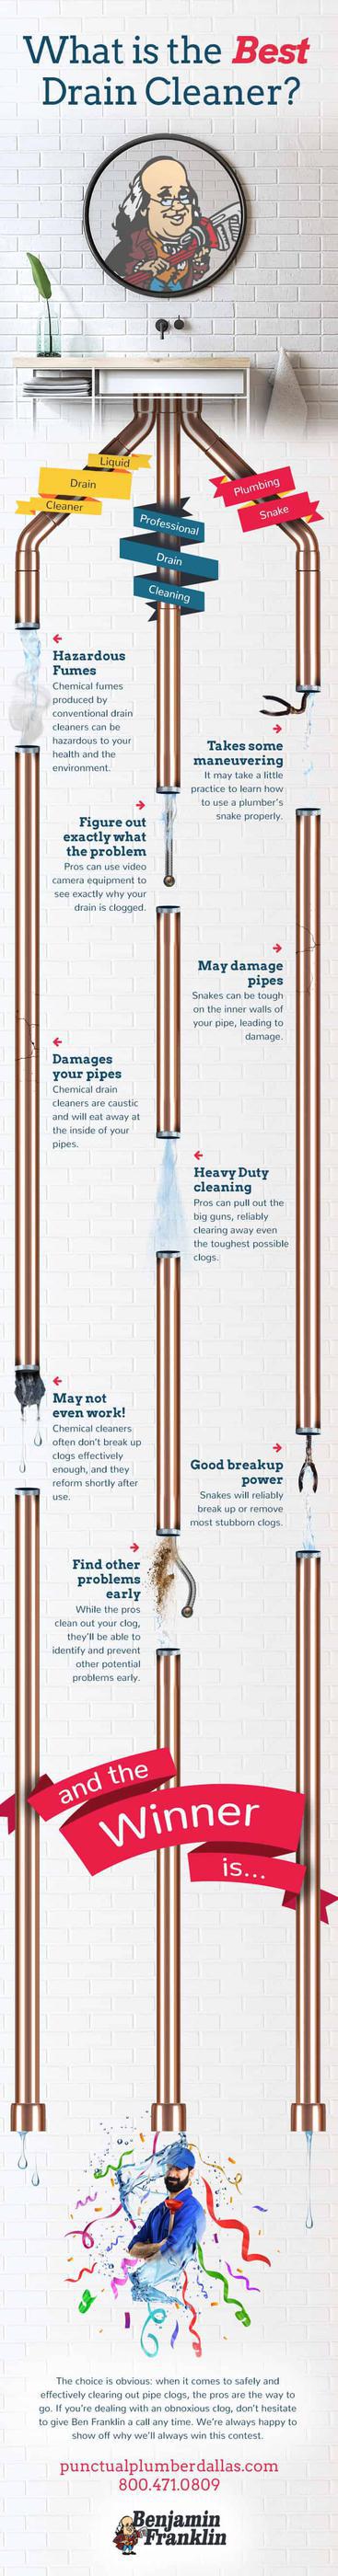 Drain Cleaner Infographic